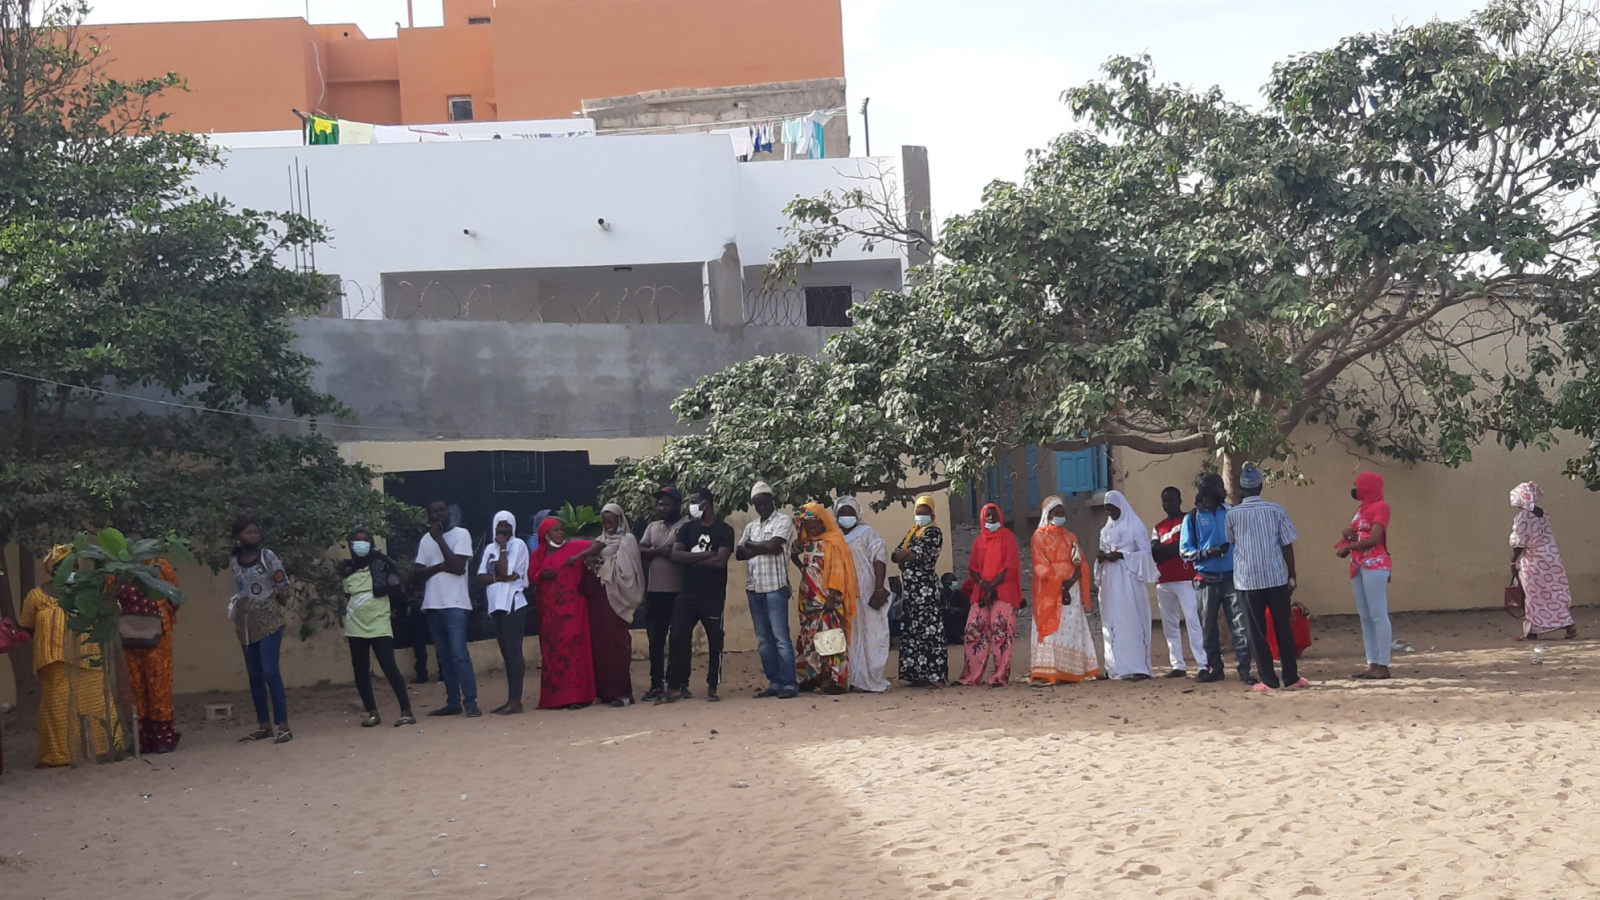 Voters stand in line waiting their turn to vote in the 2022 Senegalese local elections